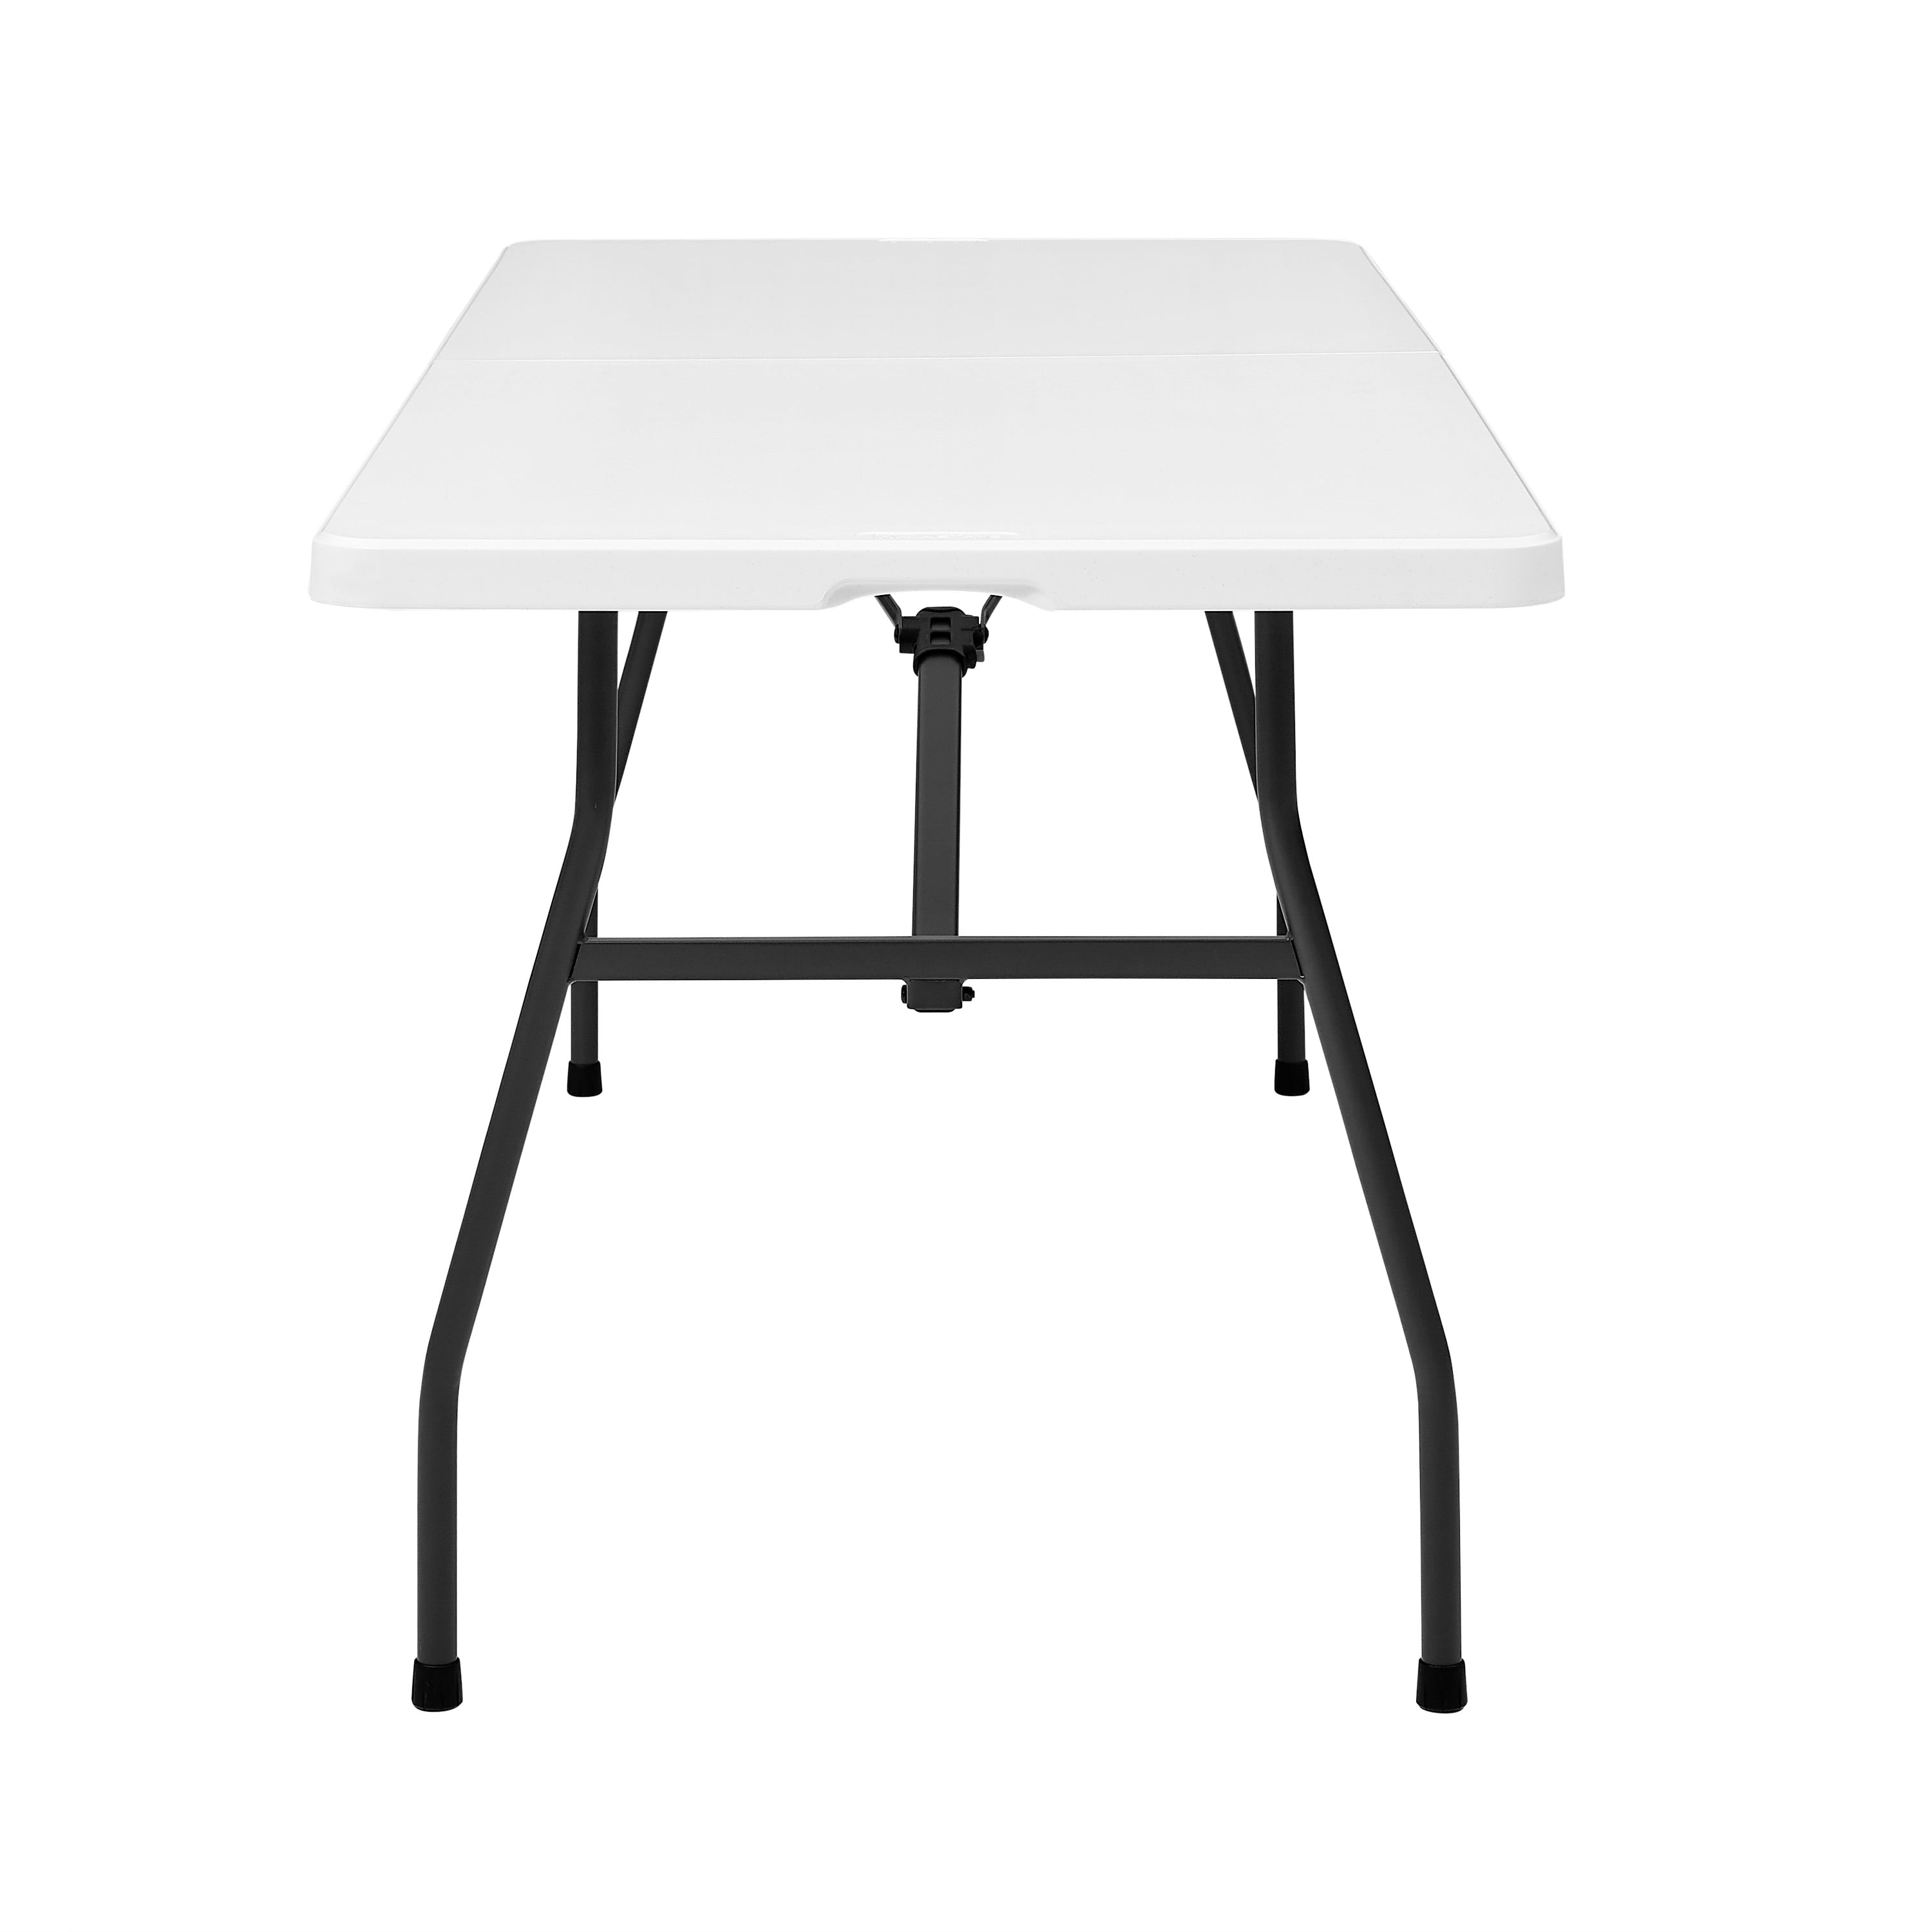 Lifetime Products 80100 Folding Table White Polyethylene With Steel Frame,